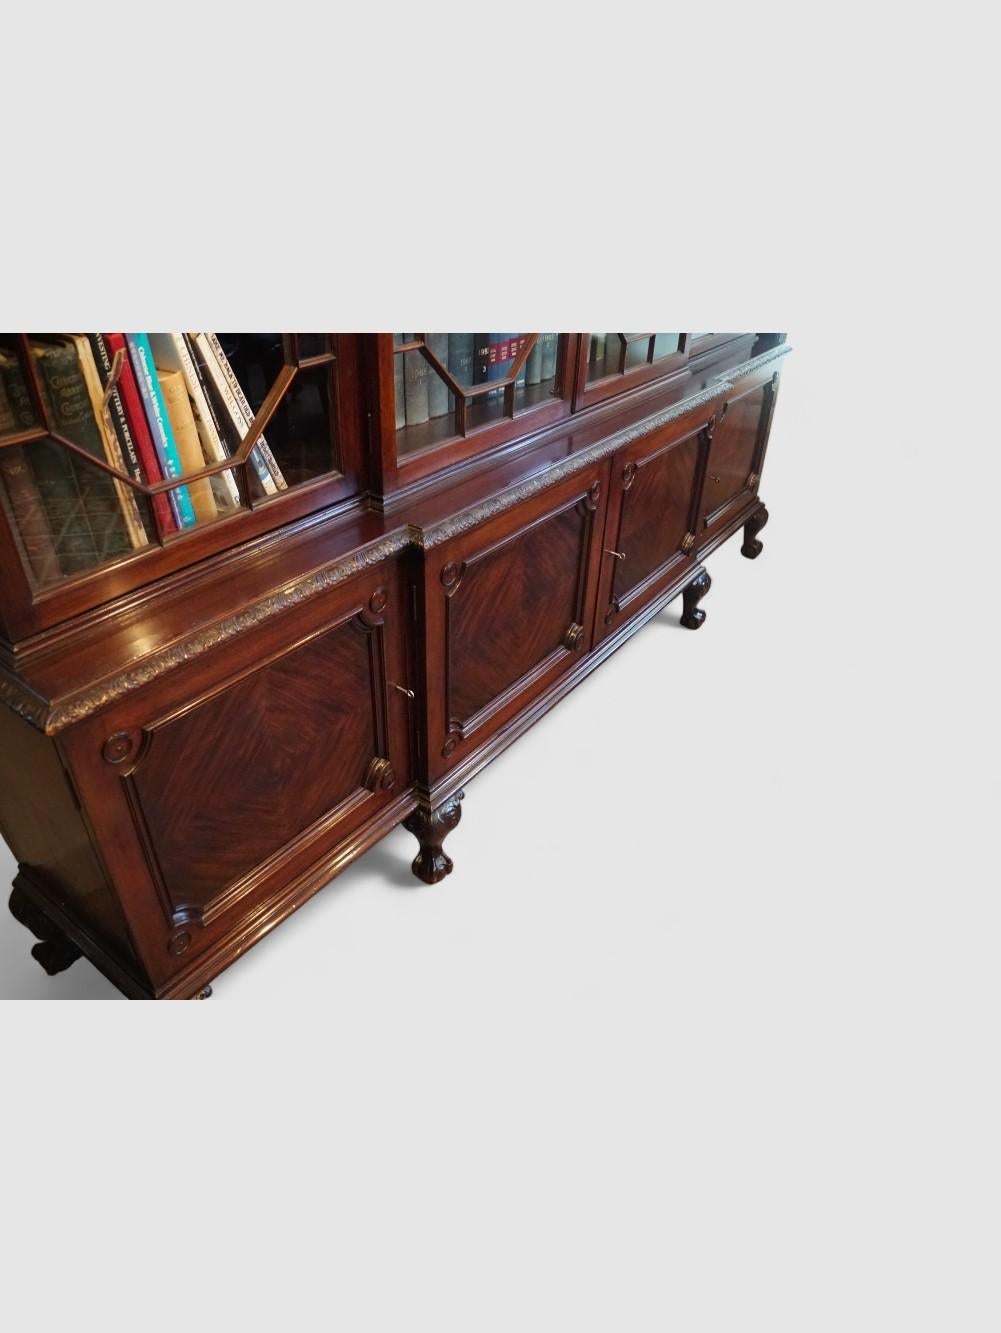 Waring and Gillows breakfront bookcase 
This Waring and Gillows breakfront bookcase was made circa 1910.
The break fronted bookcase is made in fine mahogany and made in 3 sections; this allows for easy transportation to your home.
The top section